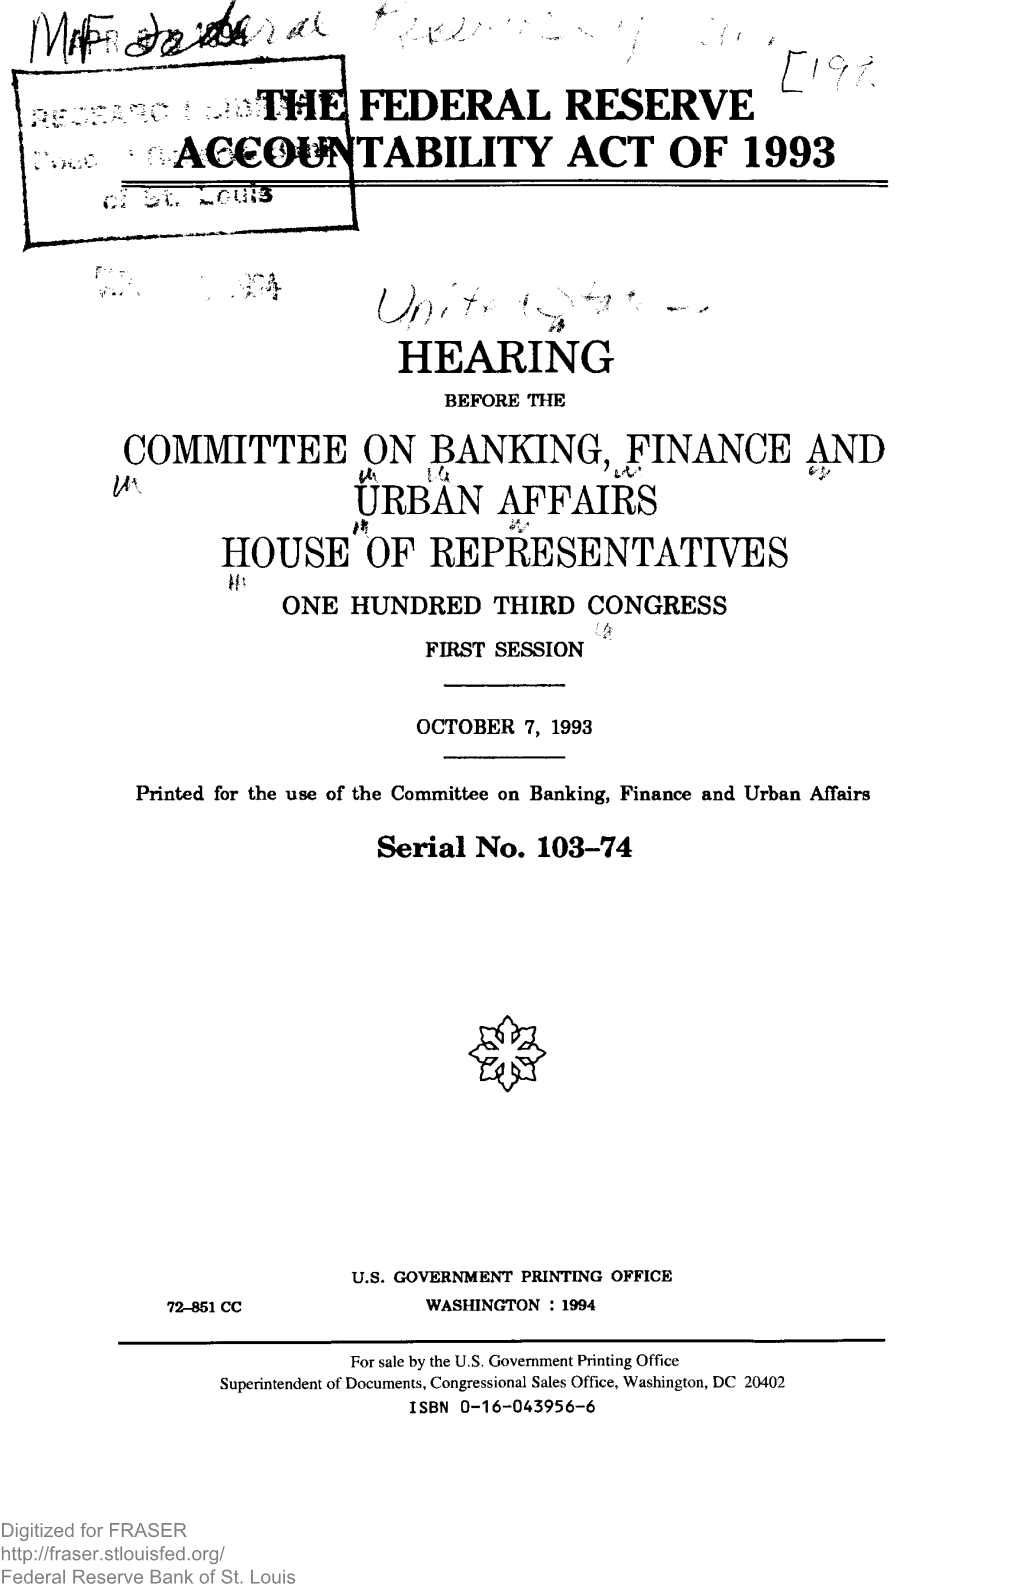 Federal Reserve Accountability Act of 1993: Hearing Before The